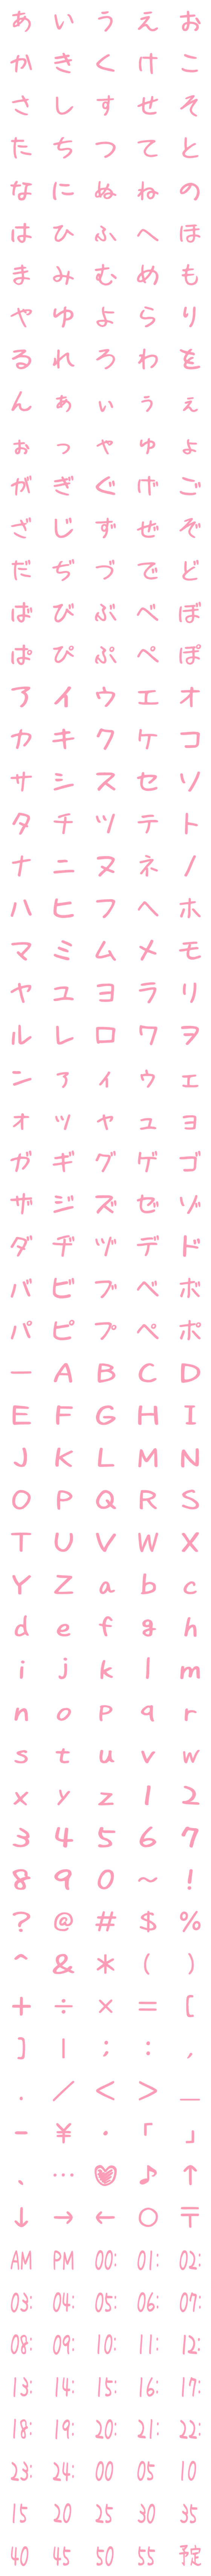 [LINE絵文字]PASTELPINK文字 絵文字の画像一覧